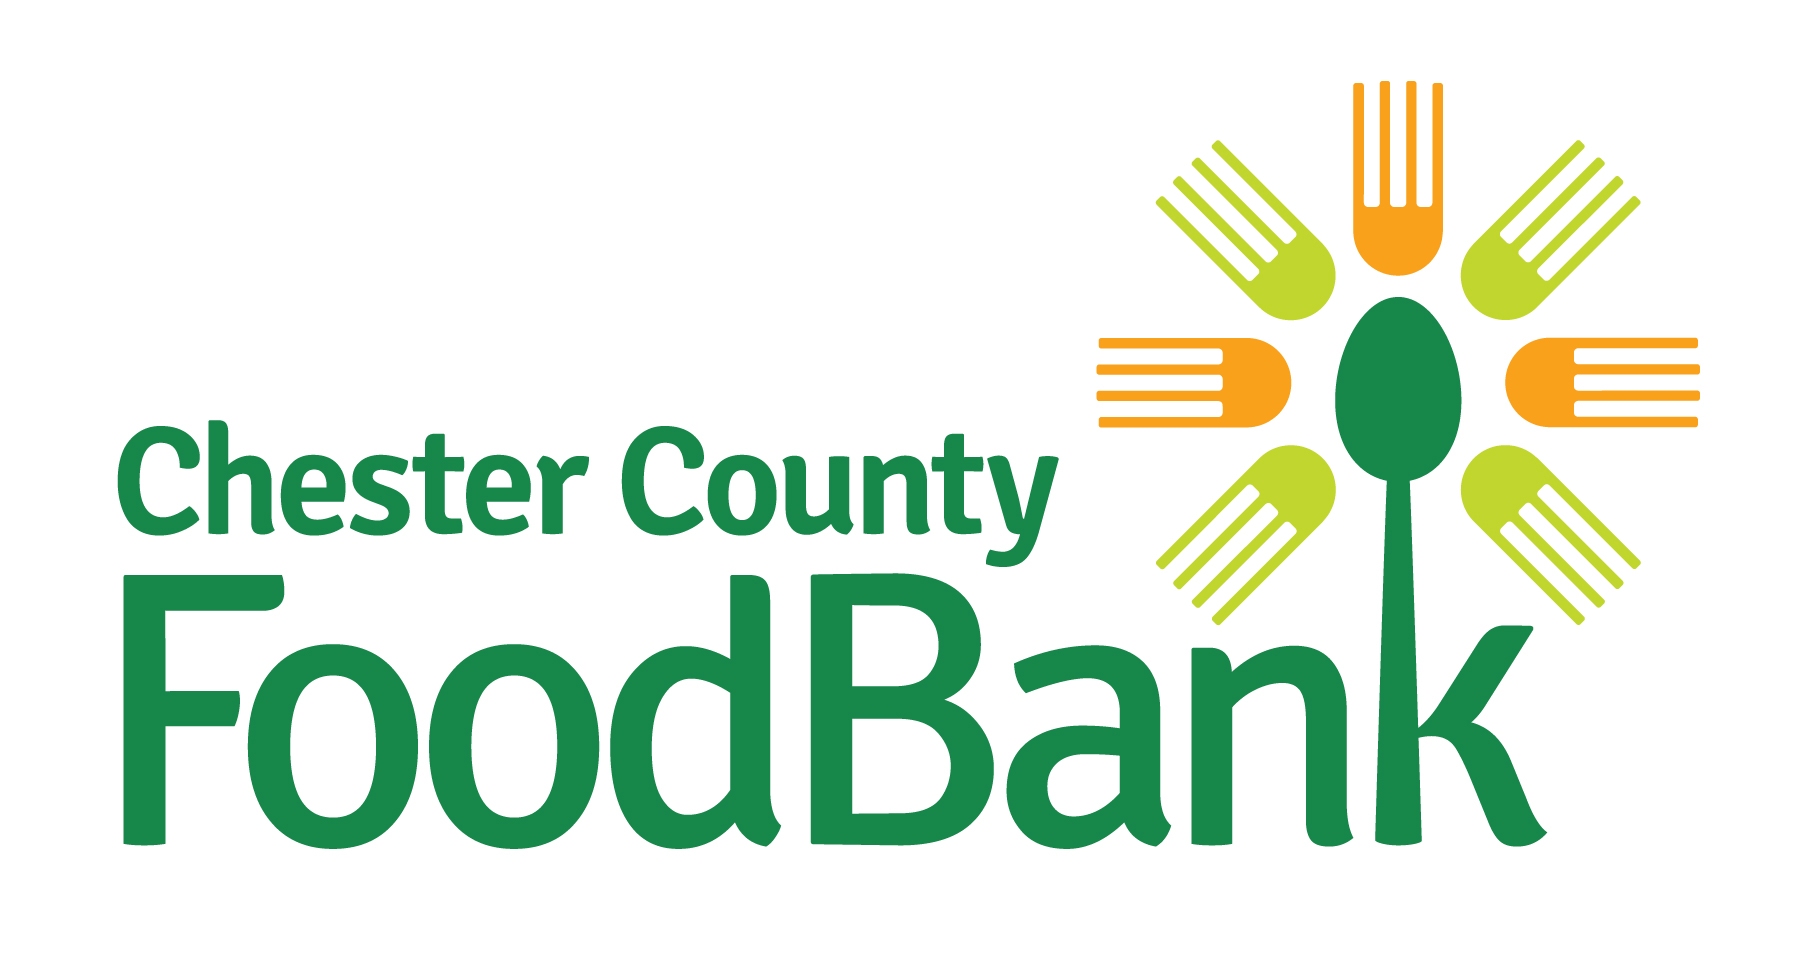 Chester County Food Bank